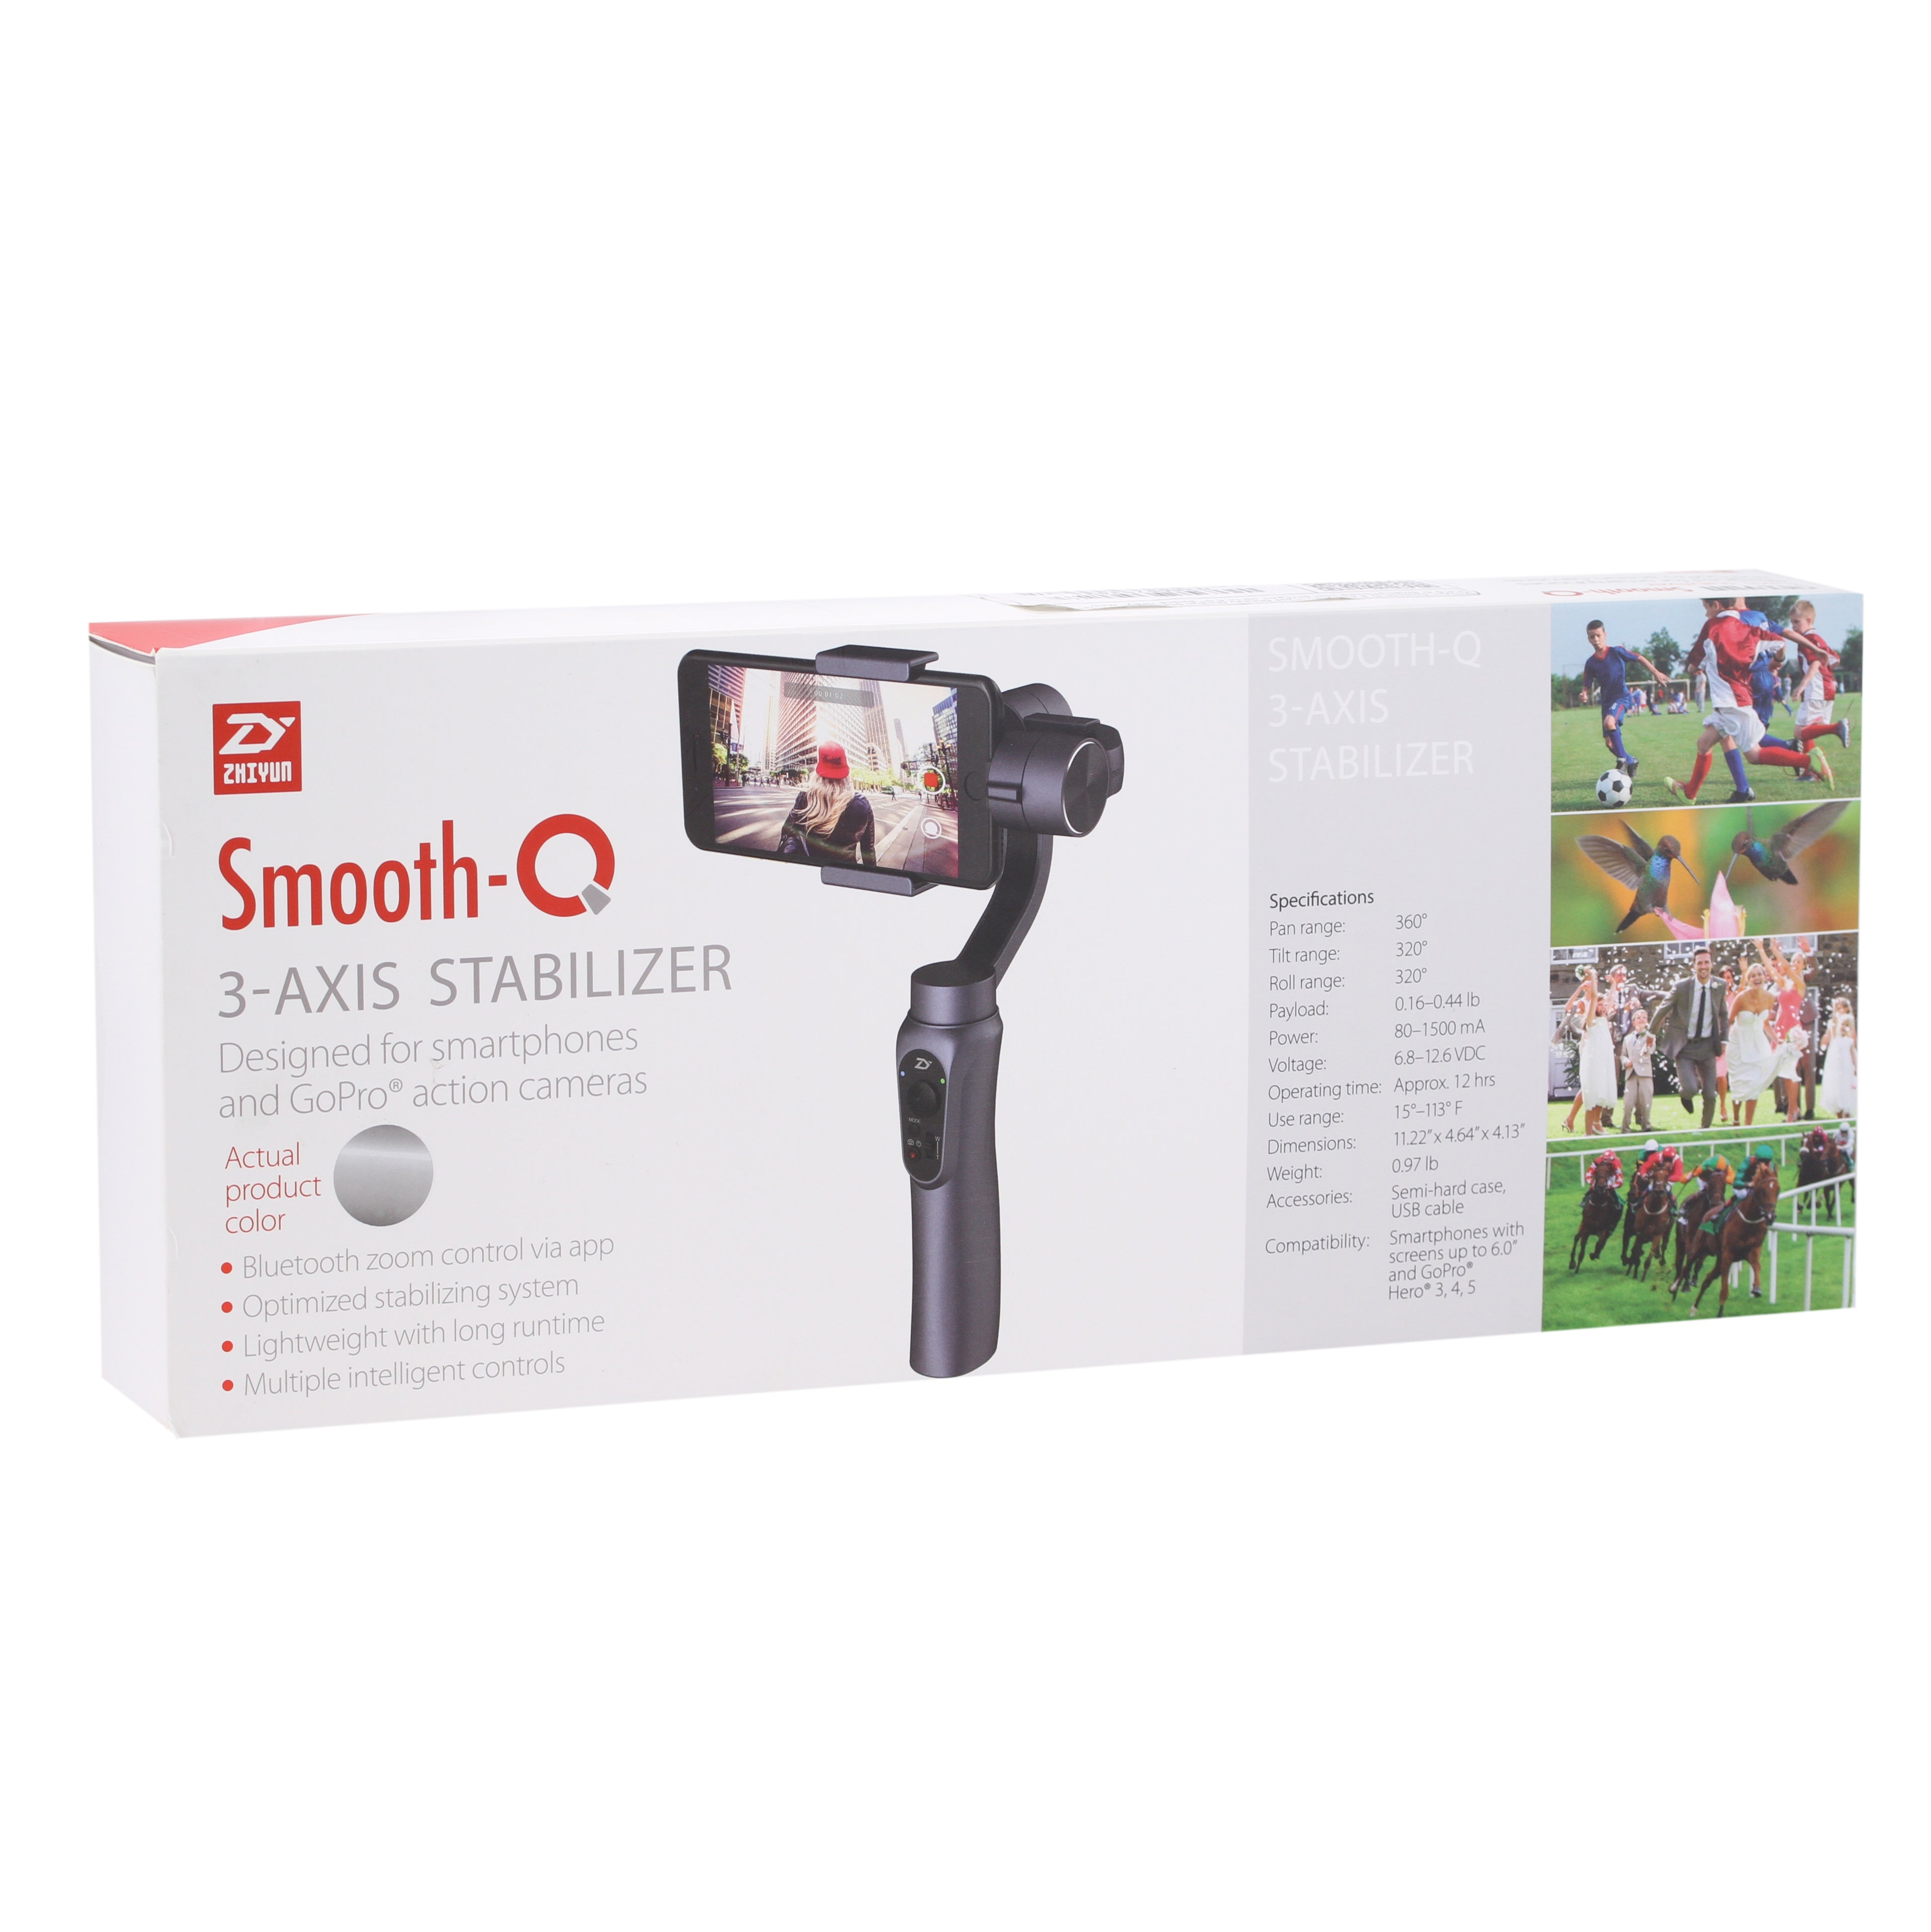 Zhiyun Smooth-Q 3 Axis Handheld Steady Gimbal Stabilizer - Black (Certified Refurbished)